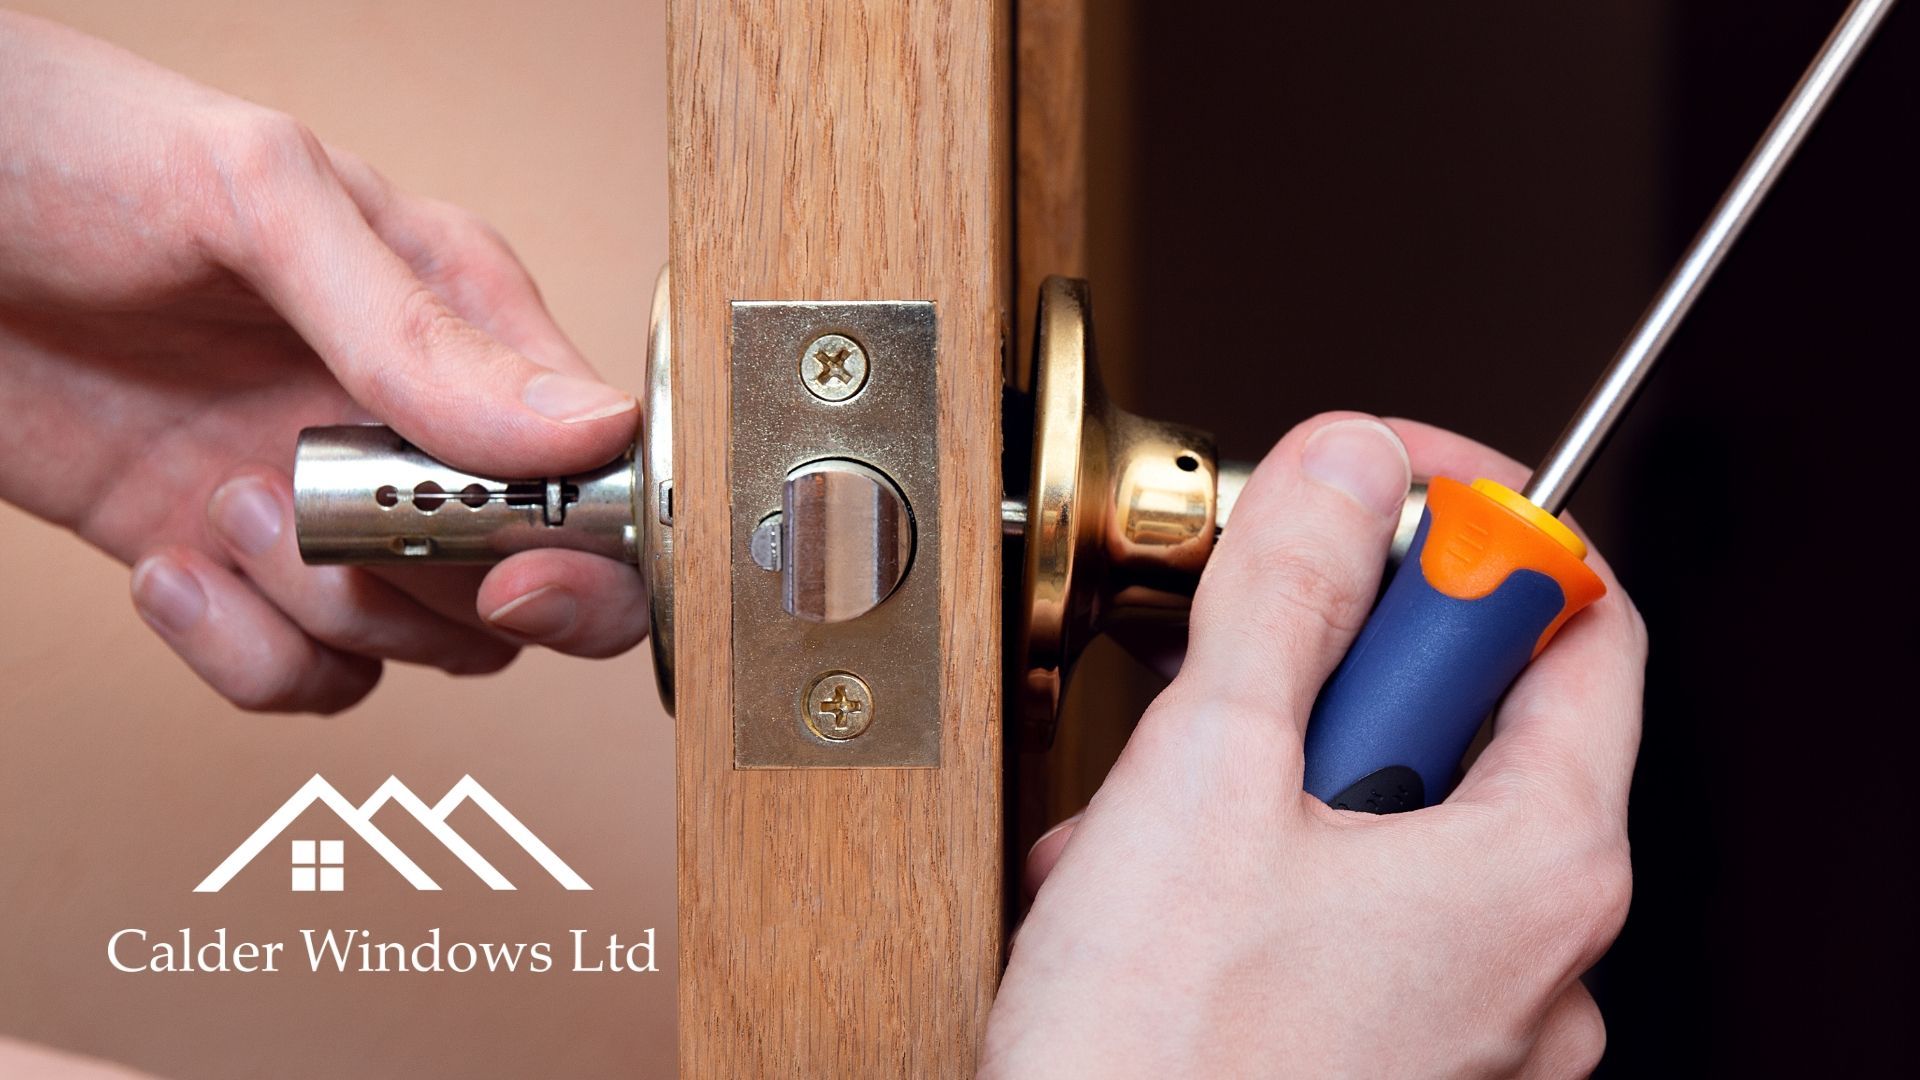 Need a replacement door? Got questions? Don't worry – Calder Windows has the answers you need.
